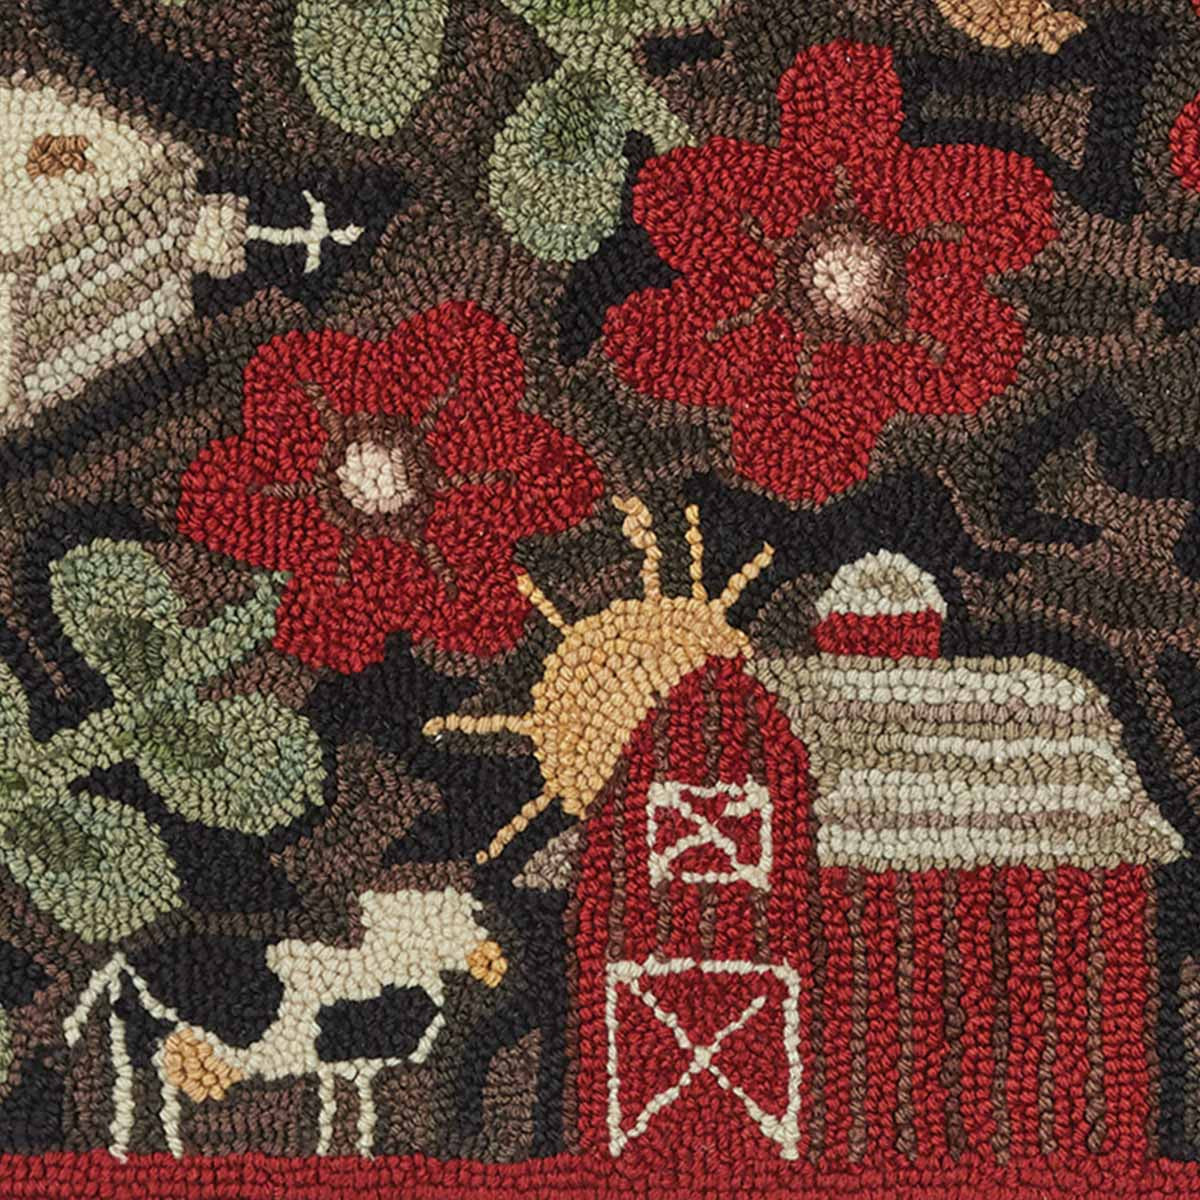 Farm Life Hooked Rug 2' x 3' Handcrafted Area Rug - SPECIAL OFFER SPEND $200 AND GET 20% OFF